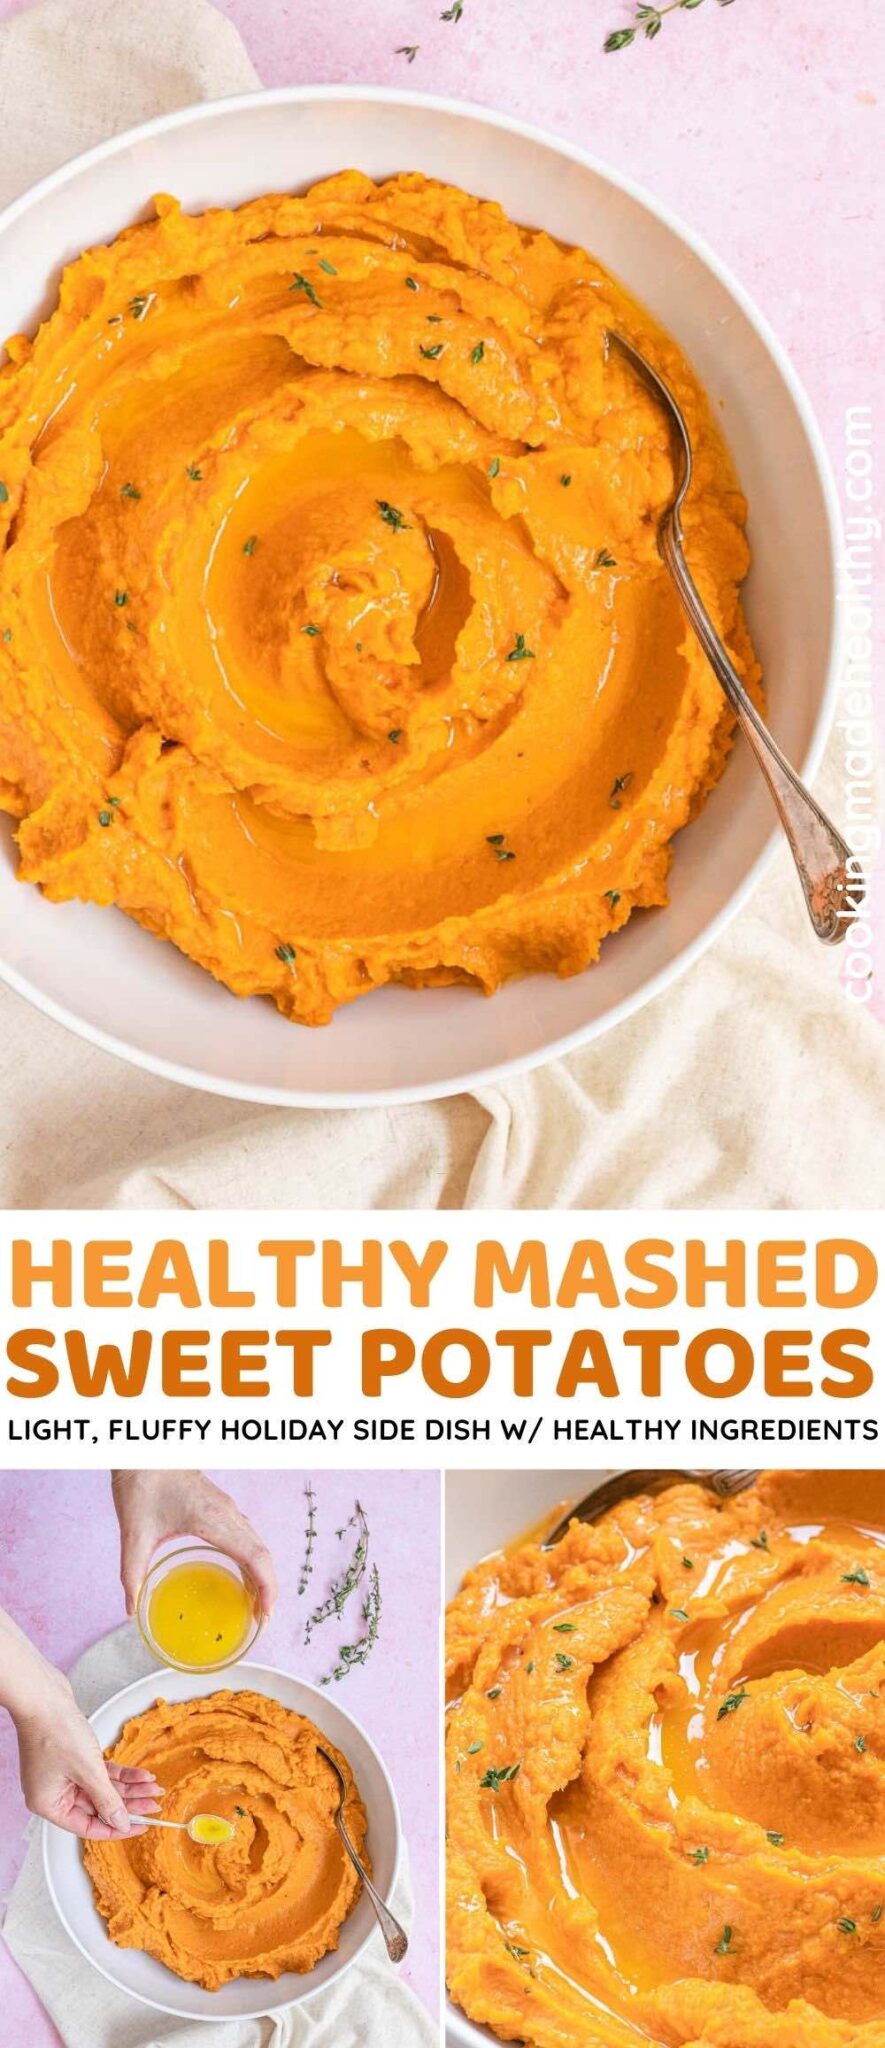 Healthy Mashed Sweet Potatoes Recipe - Cooking Made Healthy